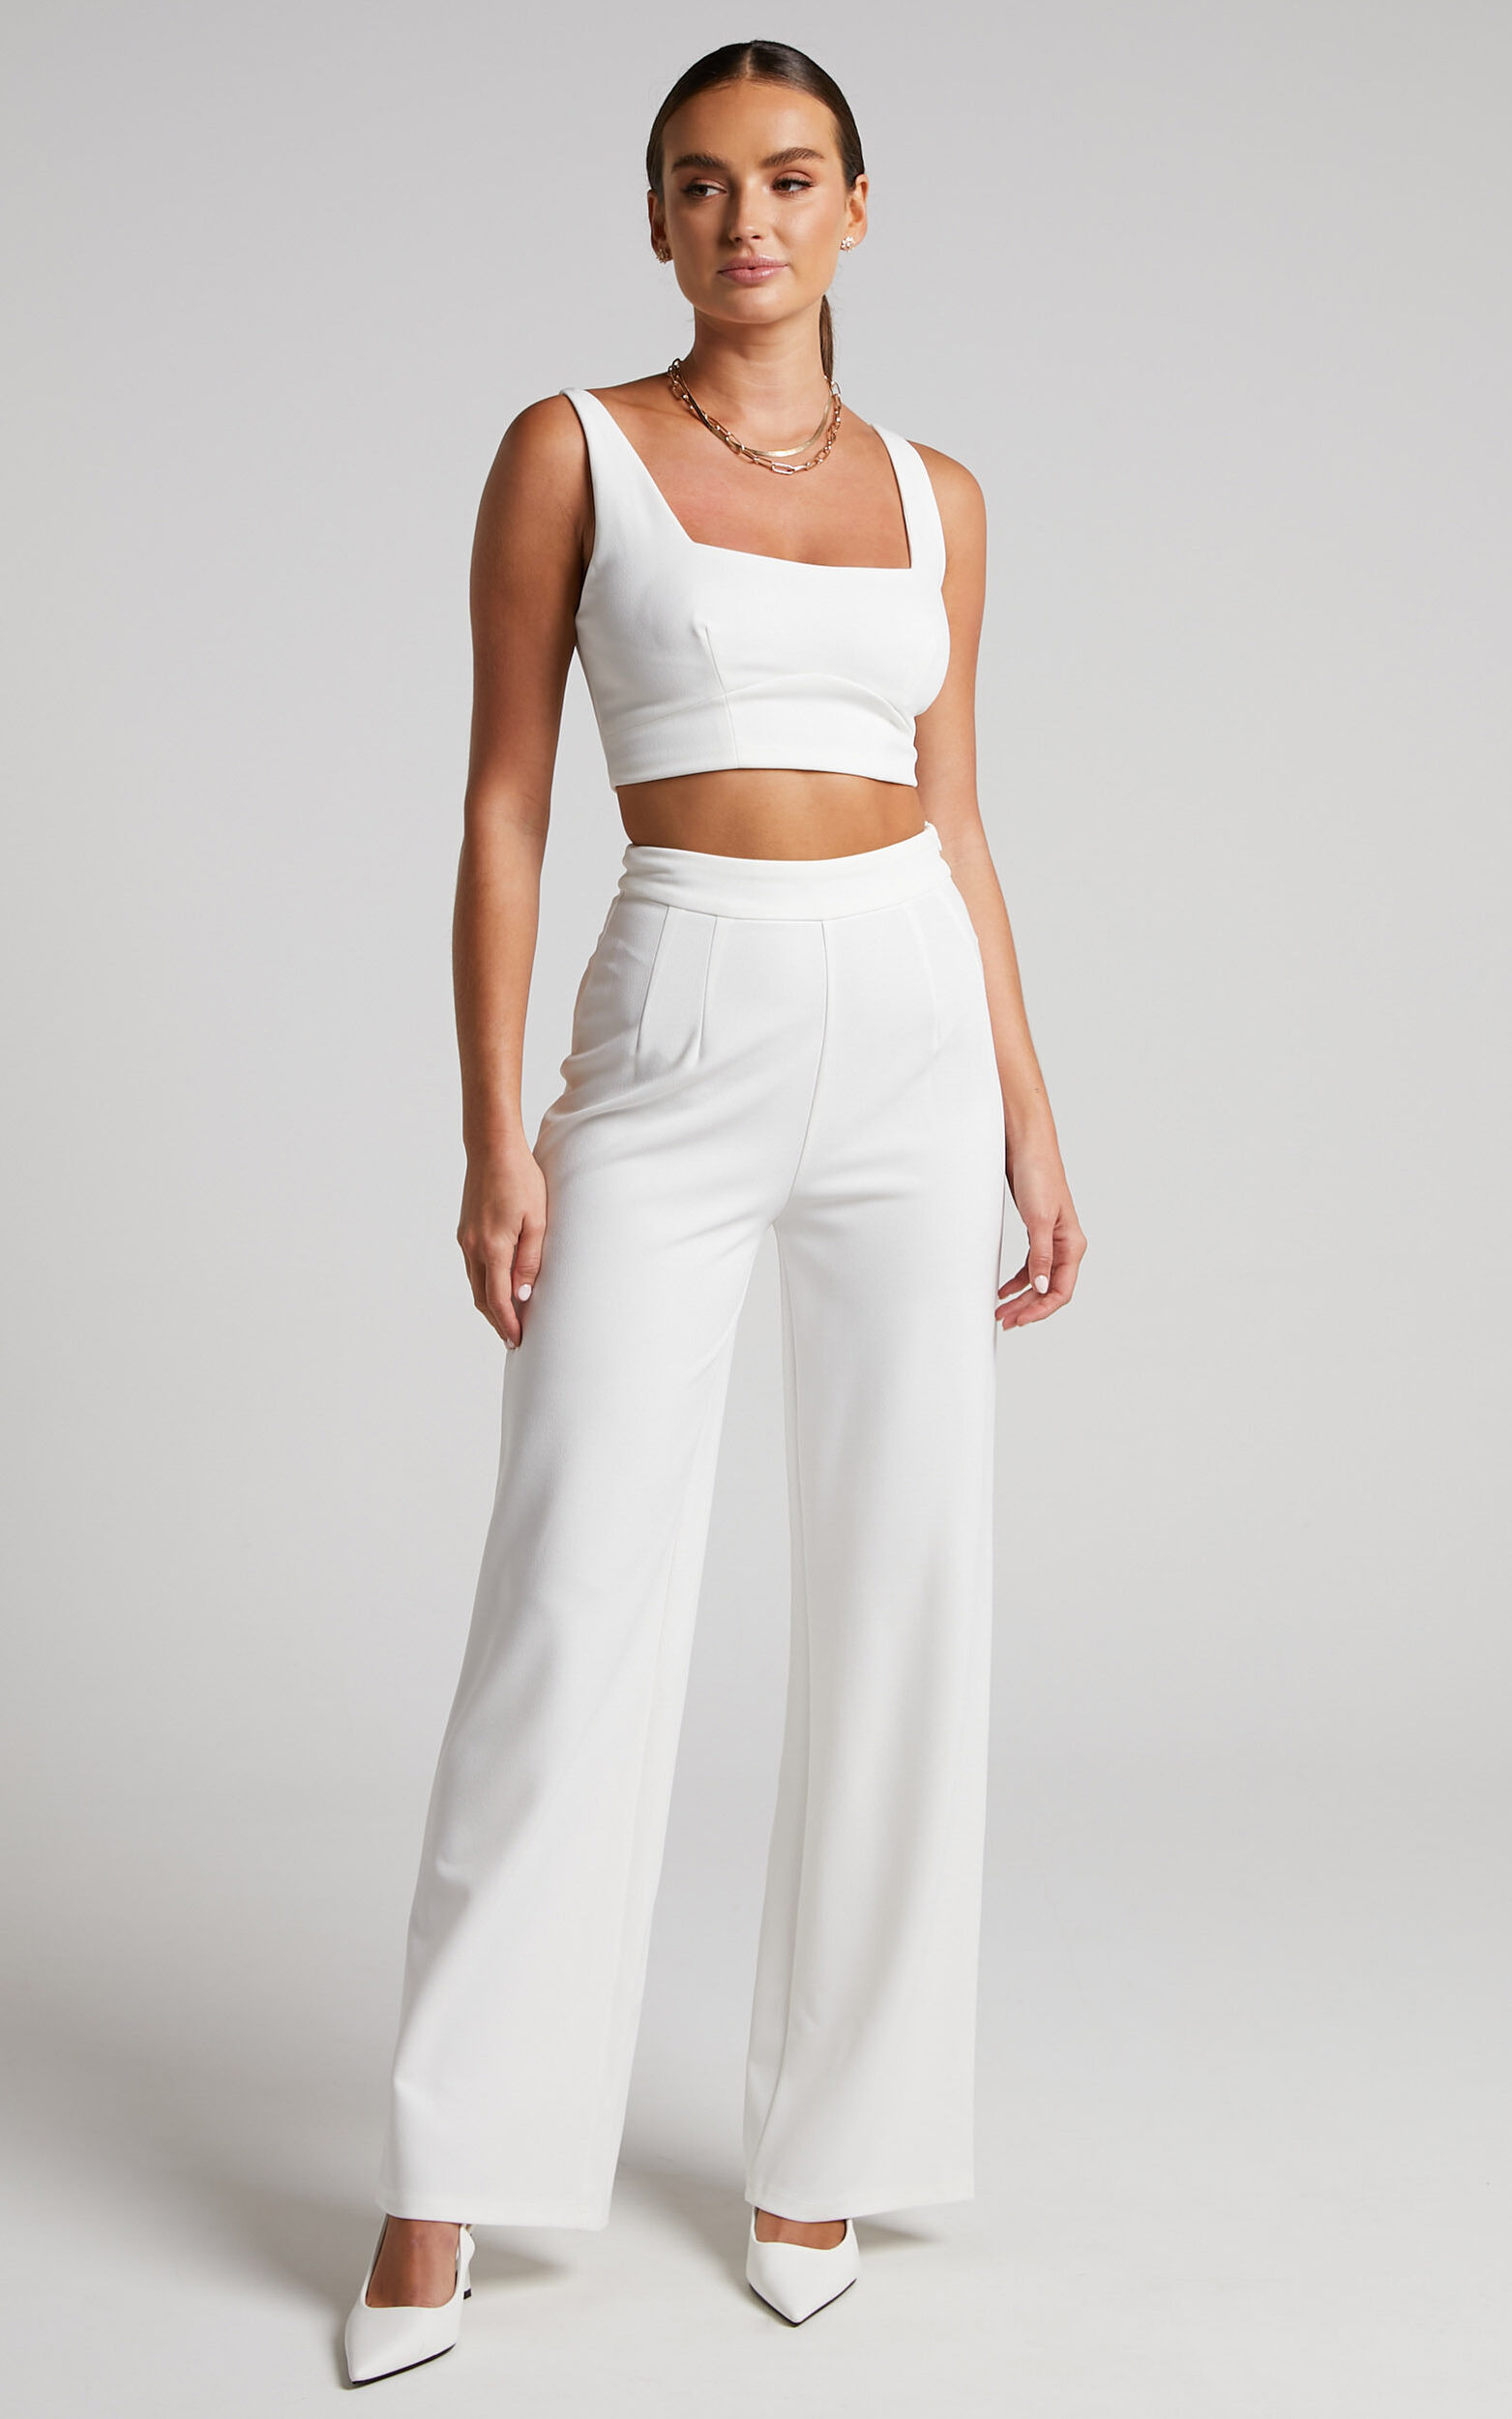 Elibeth Two Piece Set - Crop Top and High Waisted Wide Leg Pants Set in White - 06, WHT1